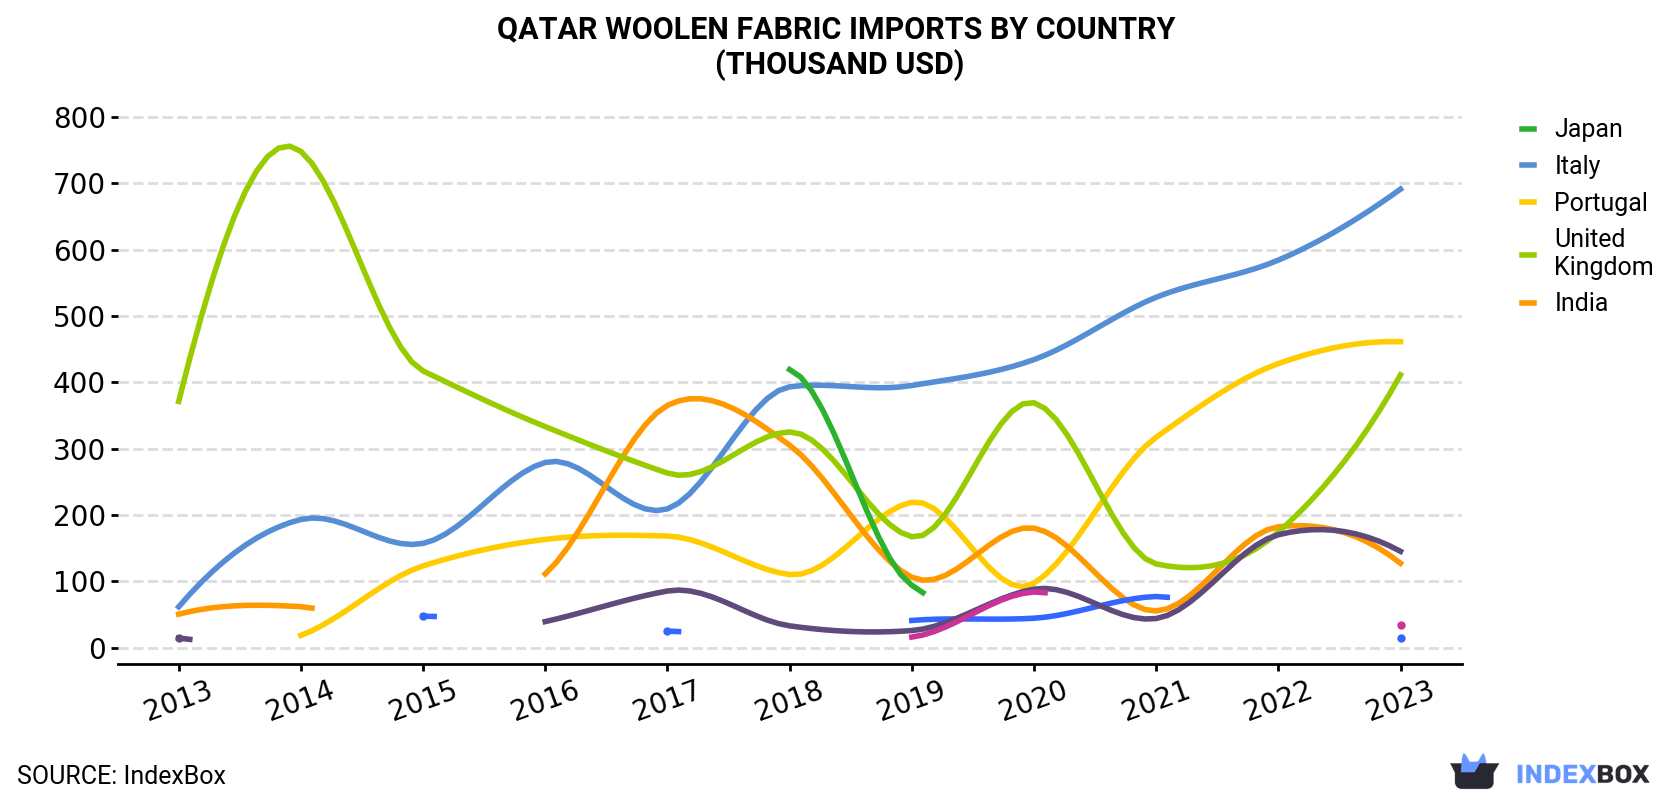 Qatar Woolen Fabric Imports By Country (Thousand USD)